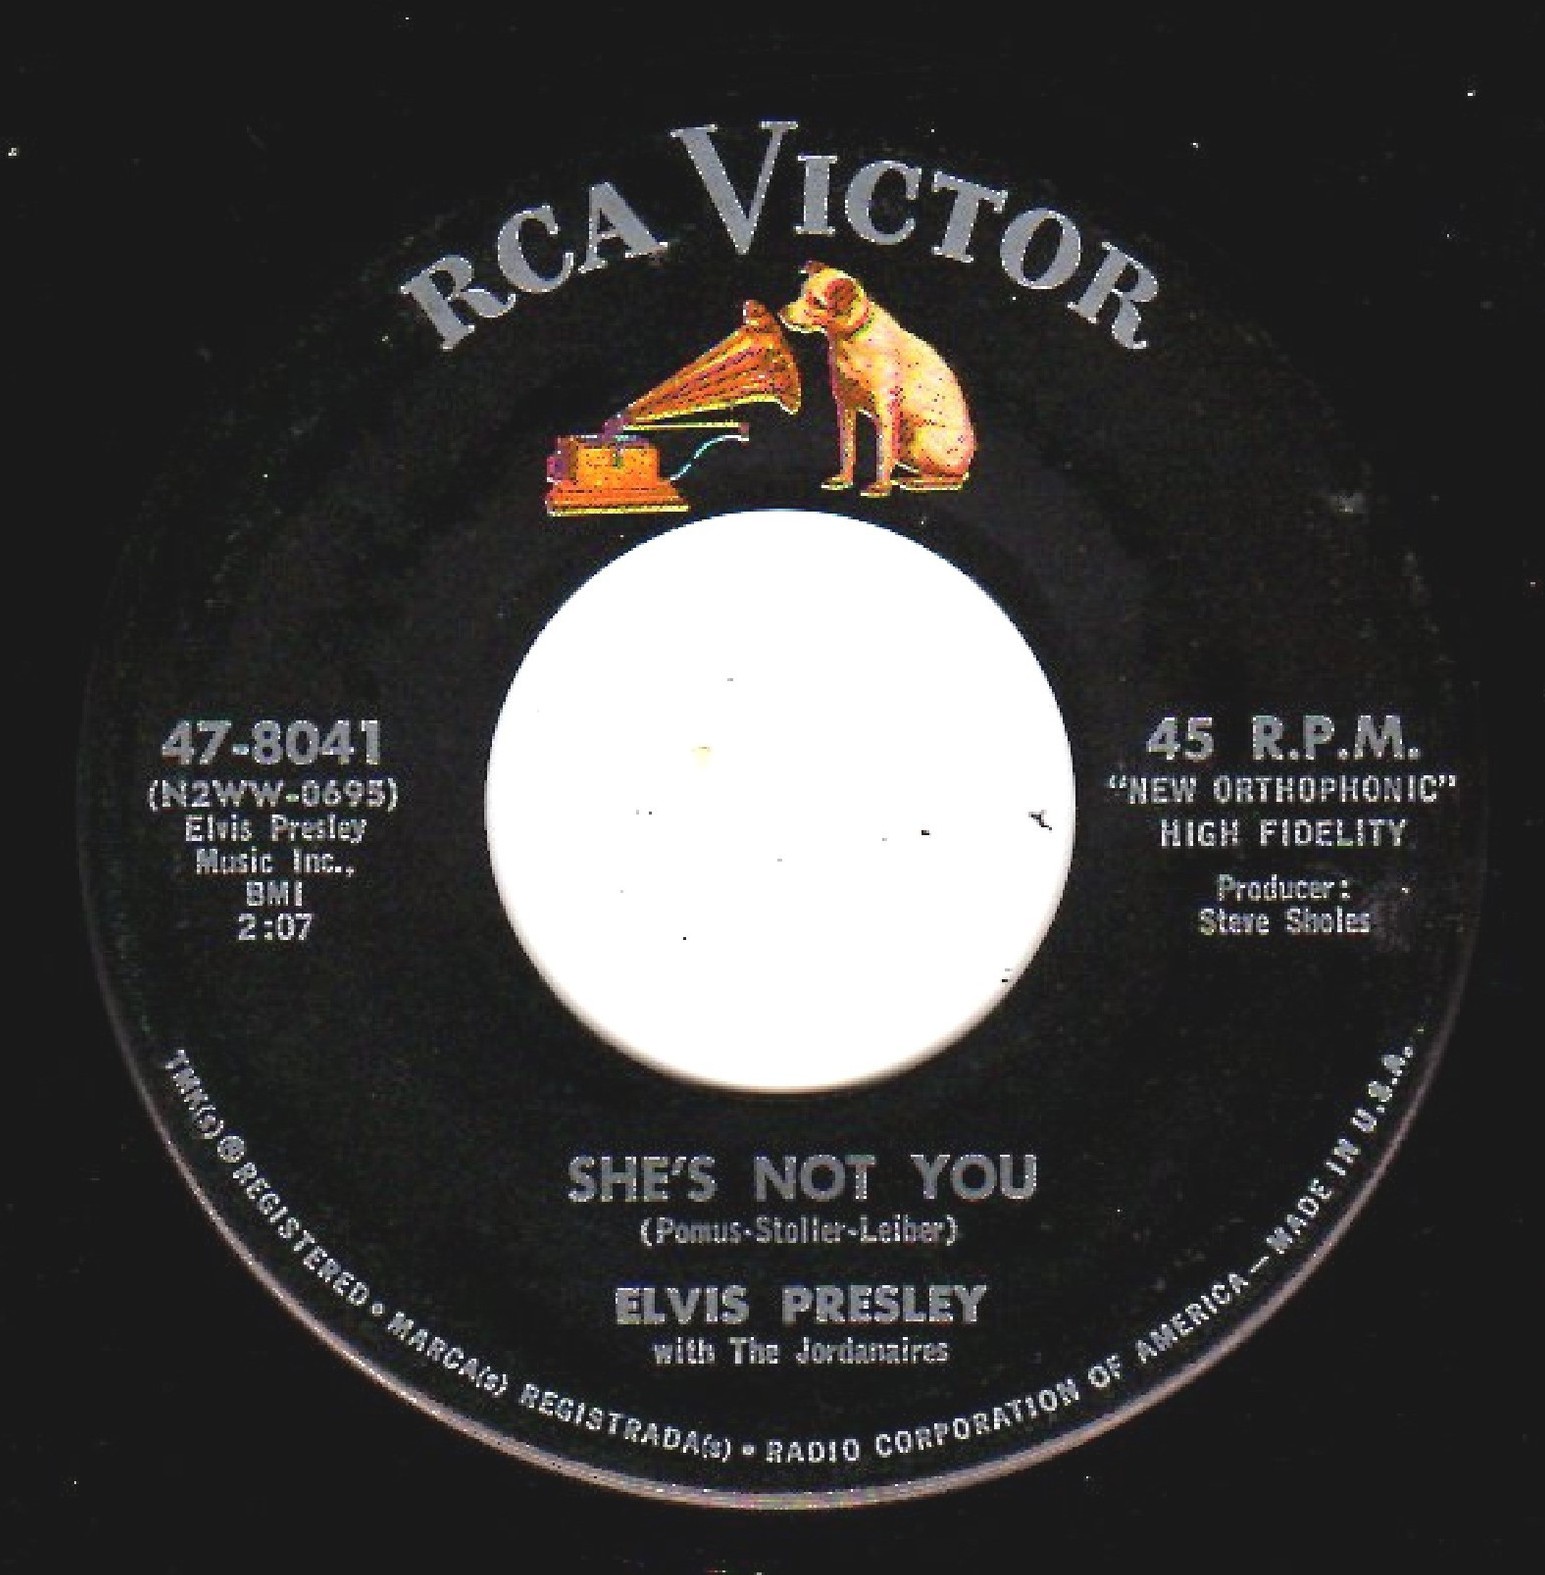 She's Not You / Just Tell Her Jim Said Hello 47-8041ajsk71